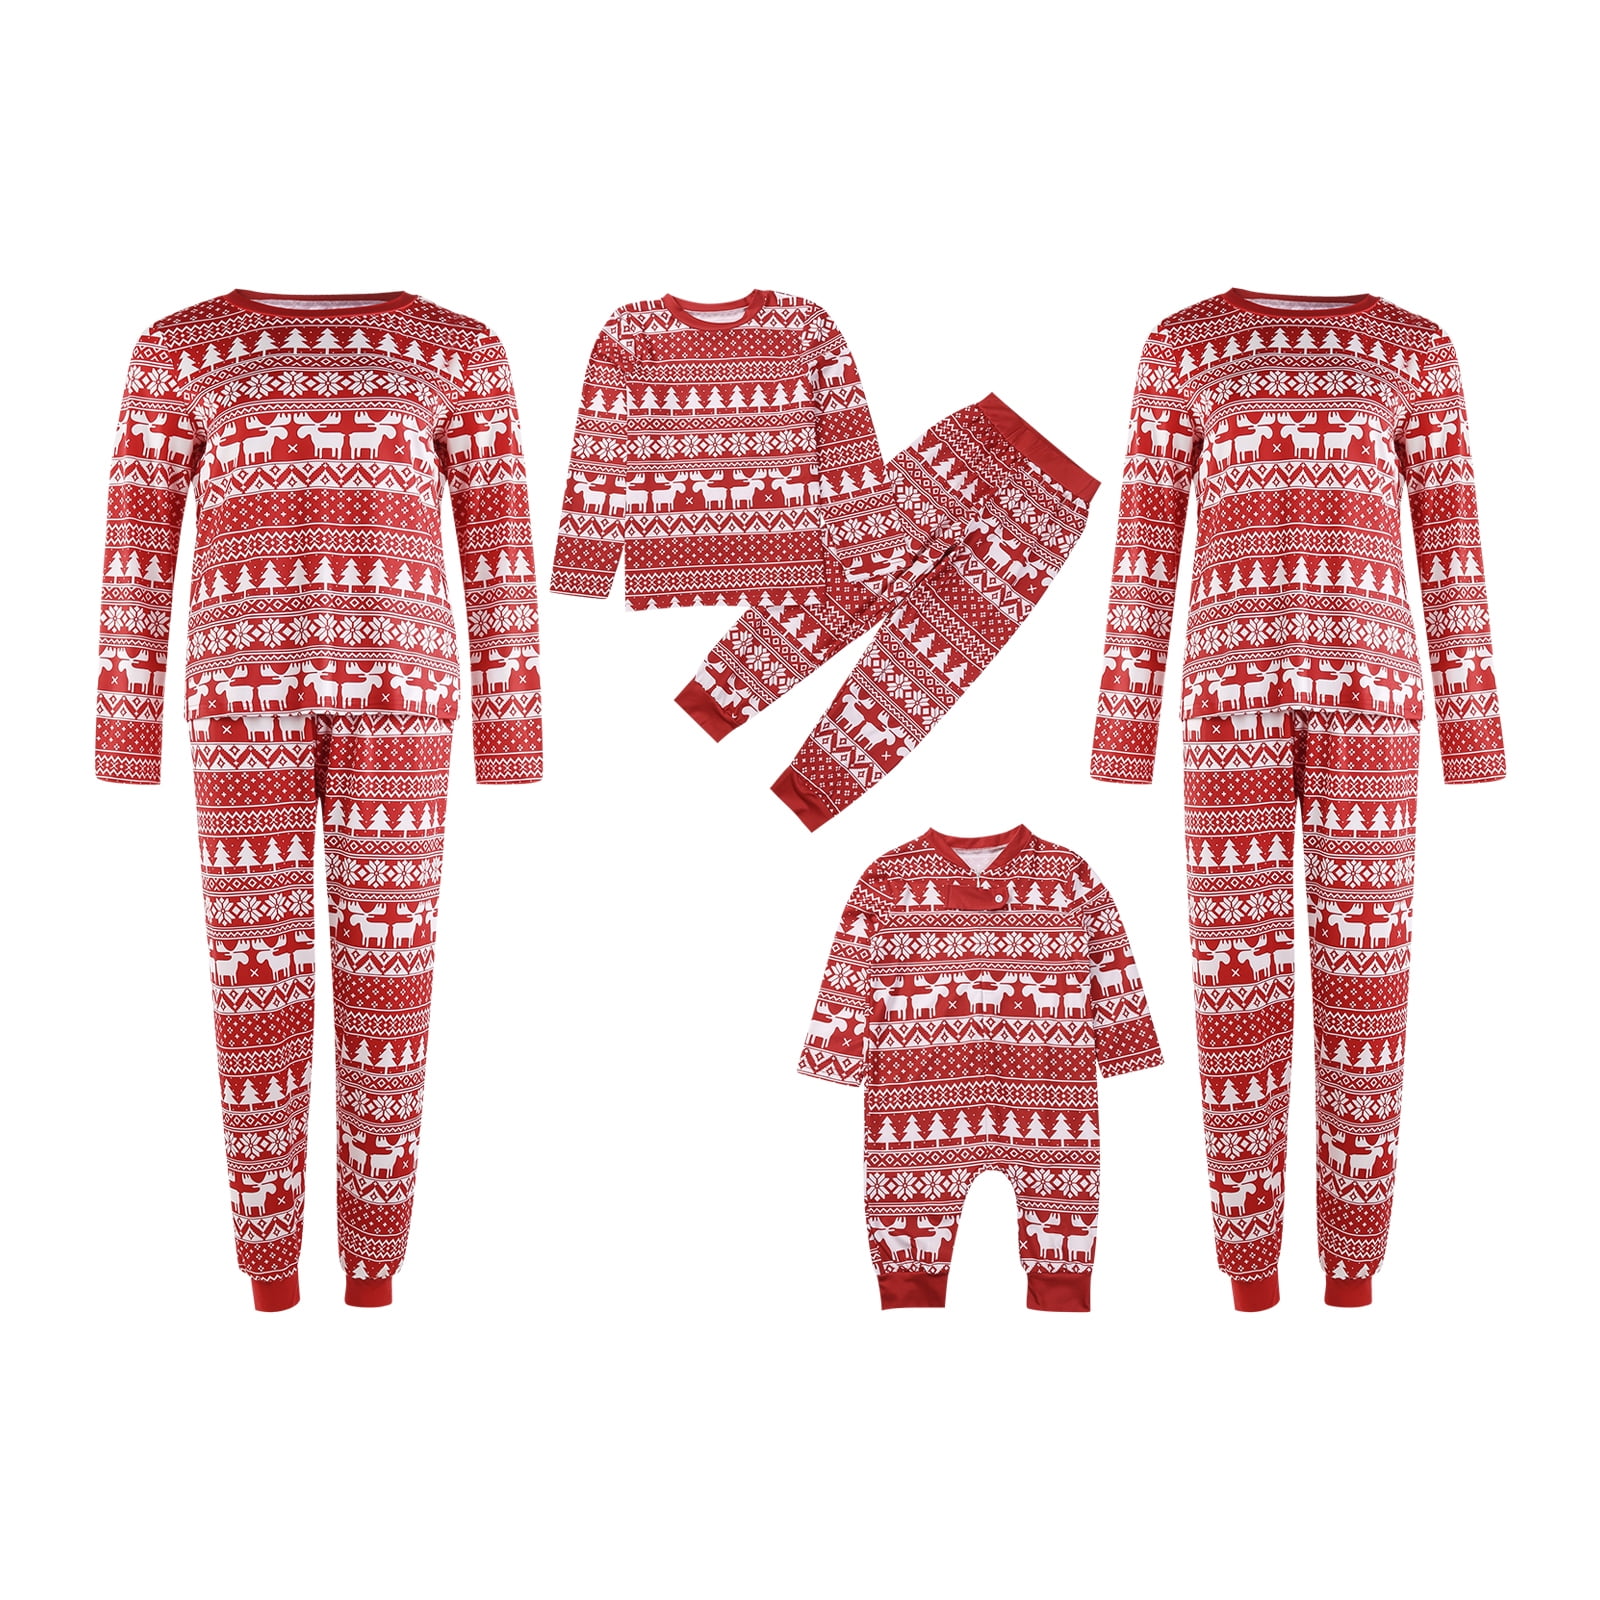 Youngull Family Christmas Pajamas Set Elk Snowflake Deer Matching Christma Pjs Holiday Sleepwear for The Family Women and Men